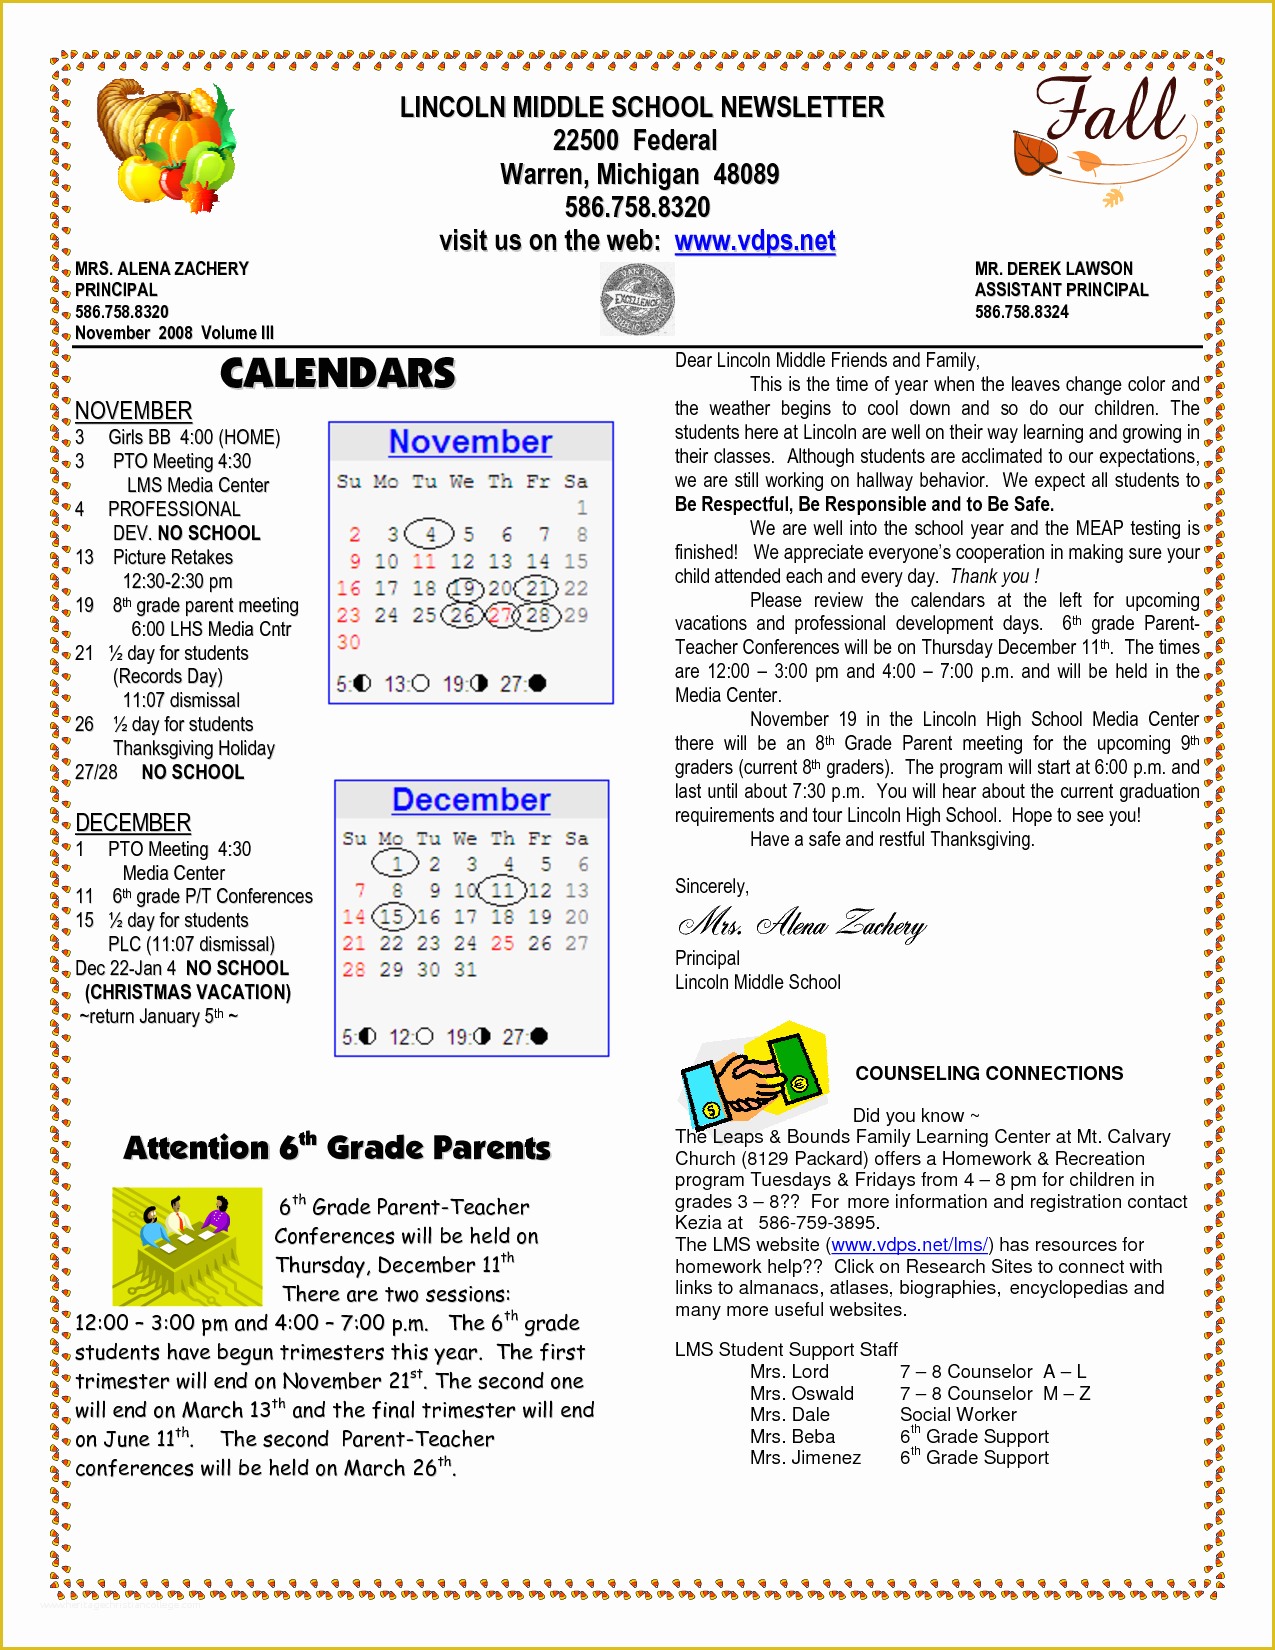 Middle School Newsletter Templates Free Of School Newsletter Templates